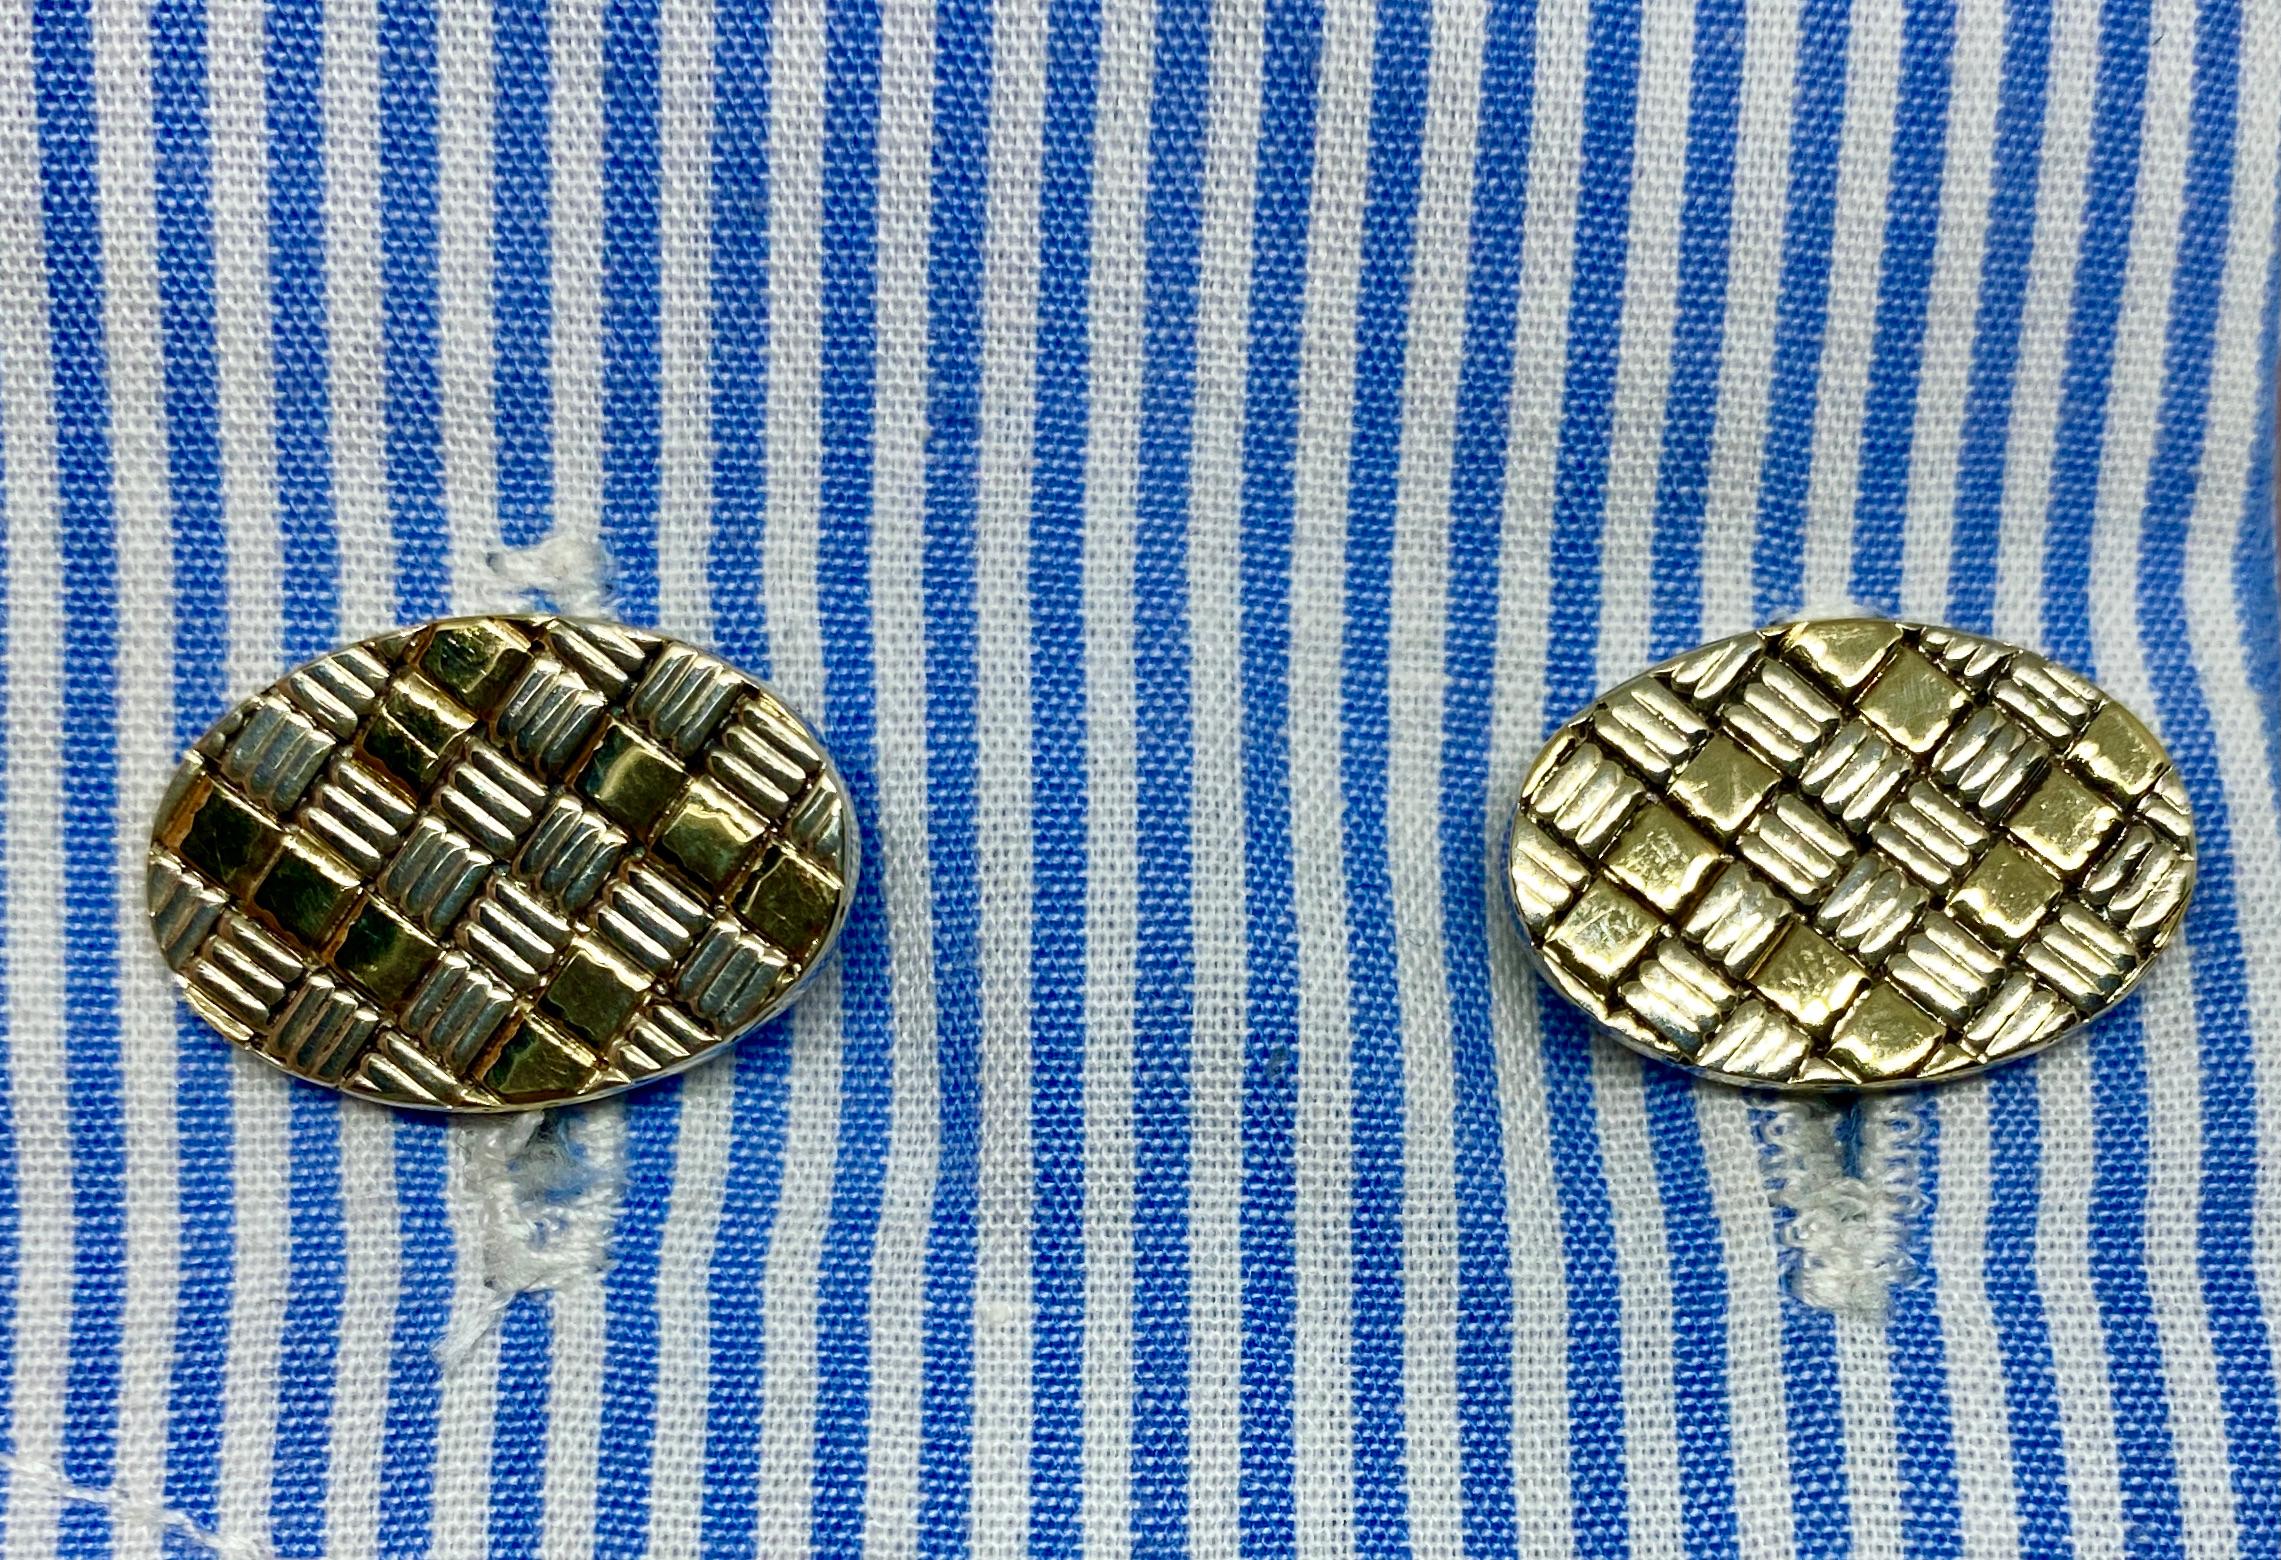 A handsome, extremely versatile pair of cufflinks in a checkerboard design rendered in 18K yellow gold and sterling silver by Cartier.

The four oval faces each measures 18.7 by 12.7mm and is joined to its mate by sterling silver connectors.  One